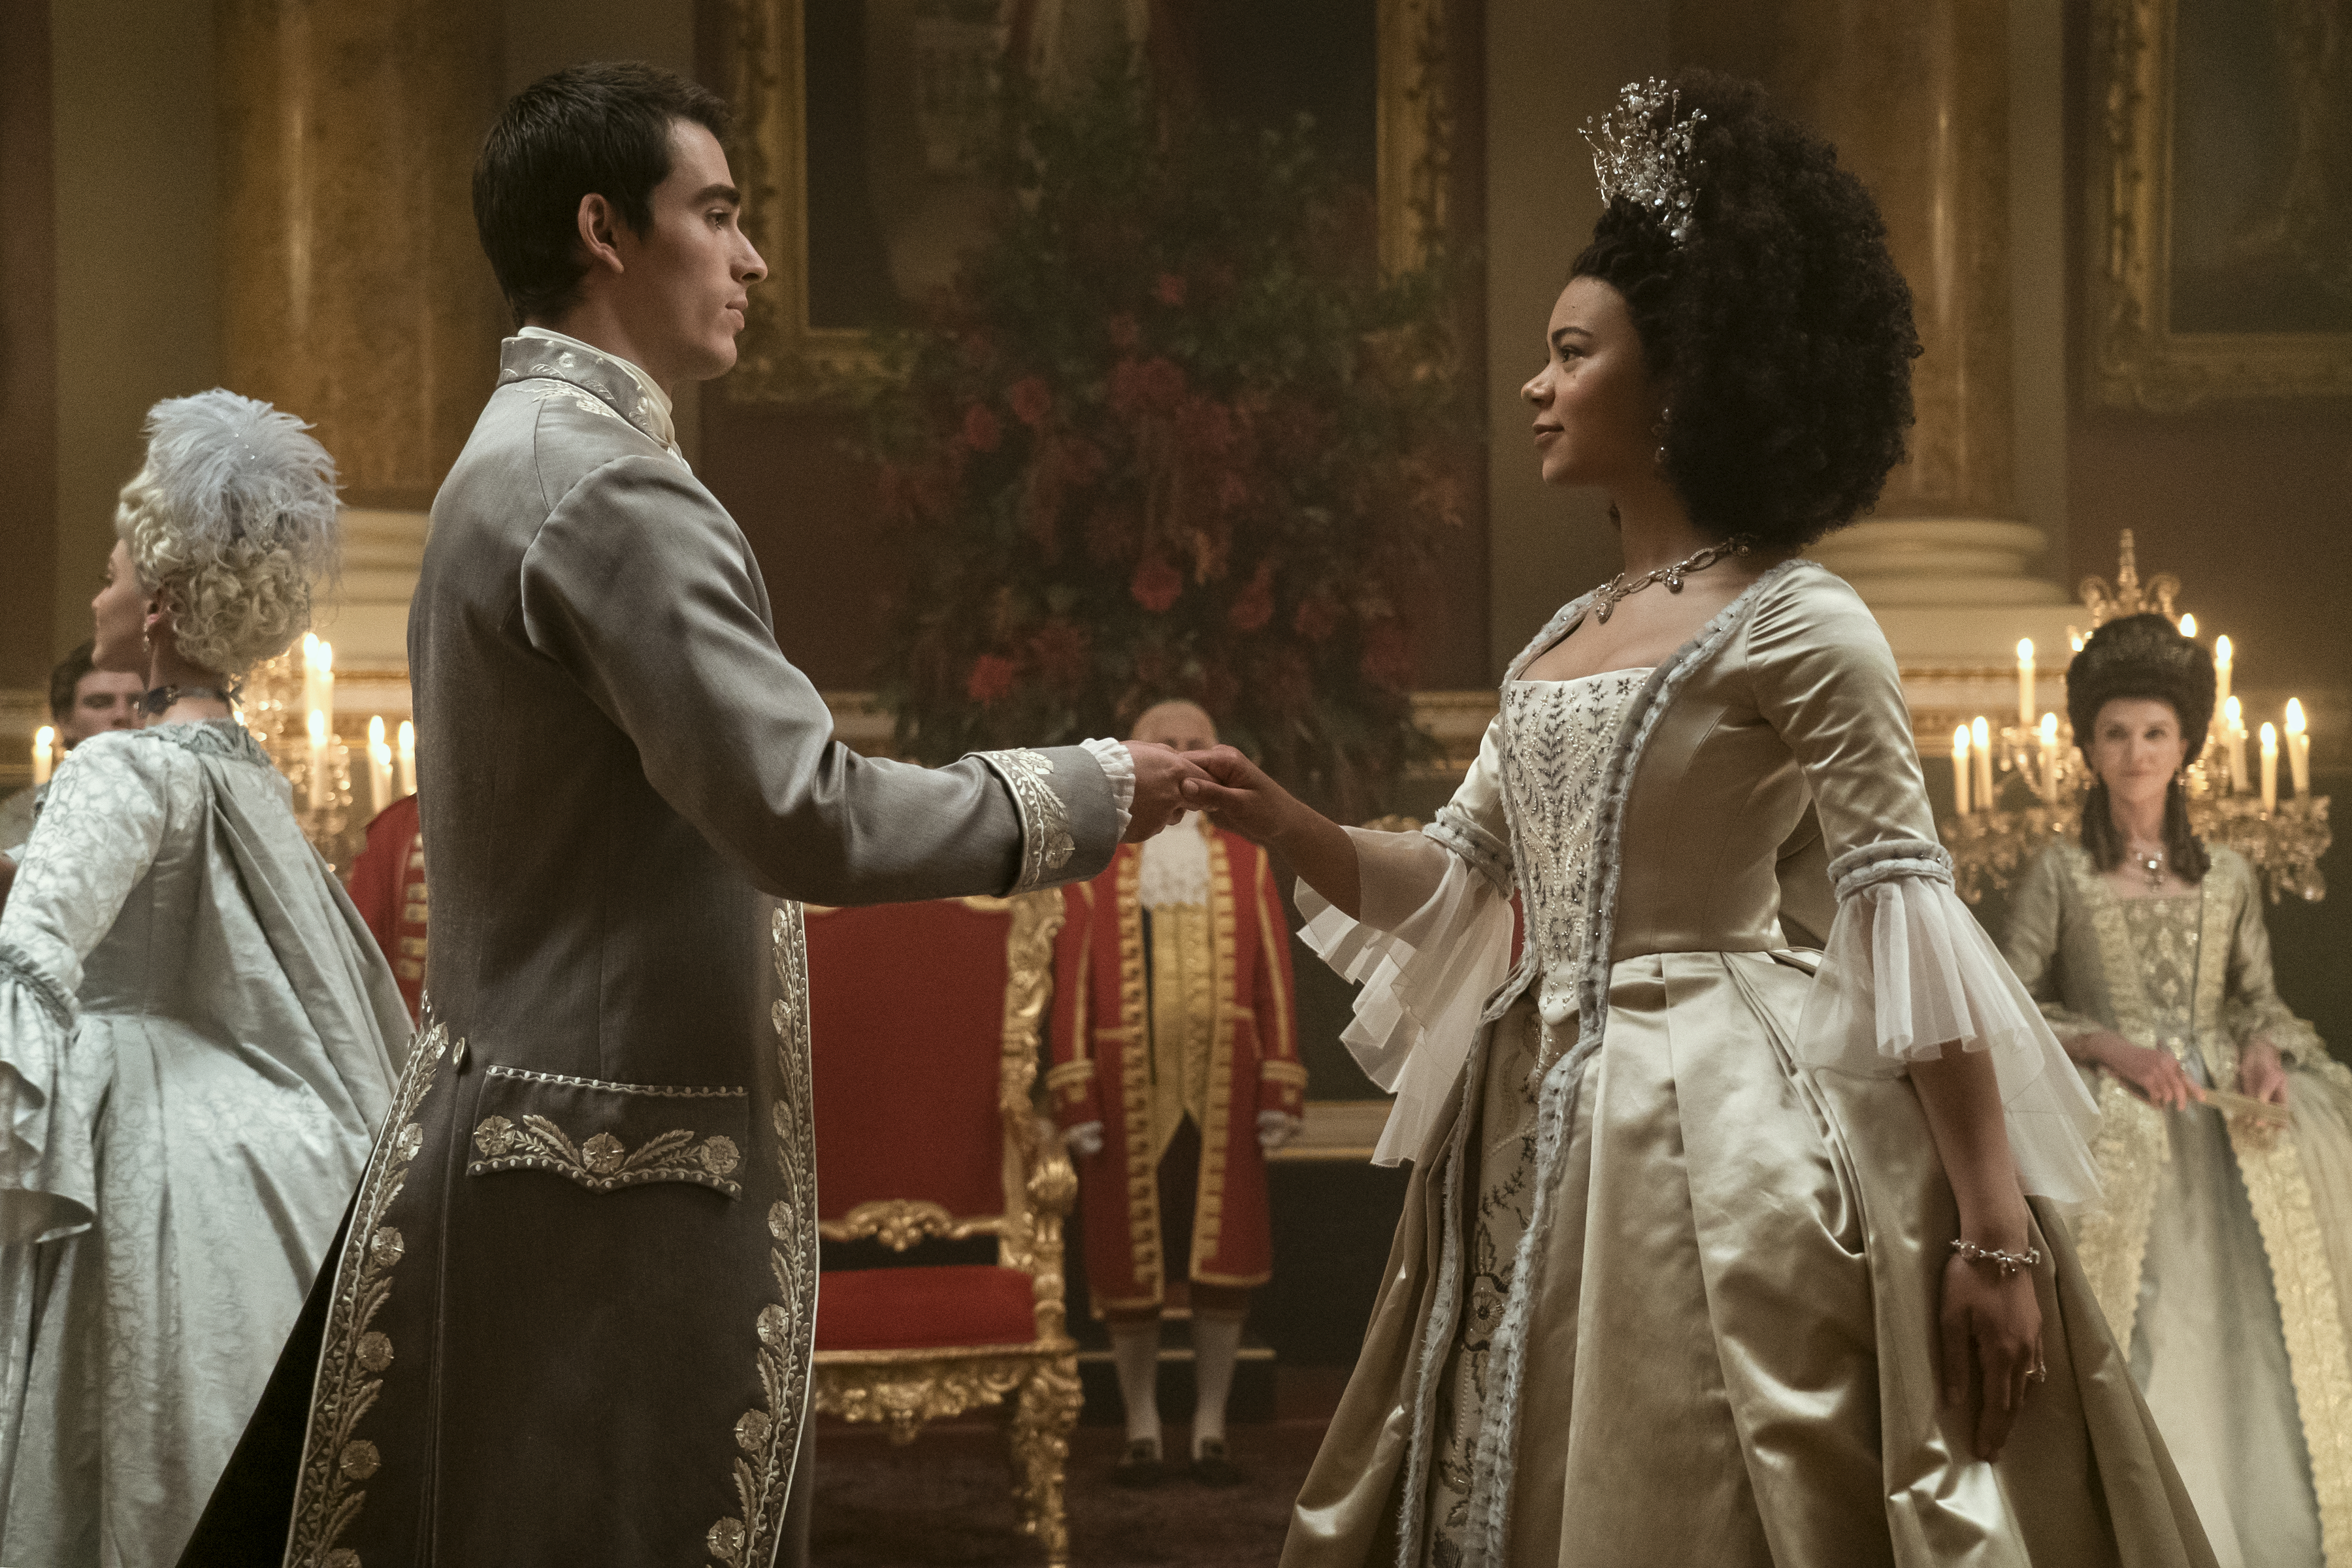 King George, a tall dark-haired young man, holds a hand out to Queen Charlotte, a young woman with an impressive afro